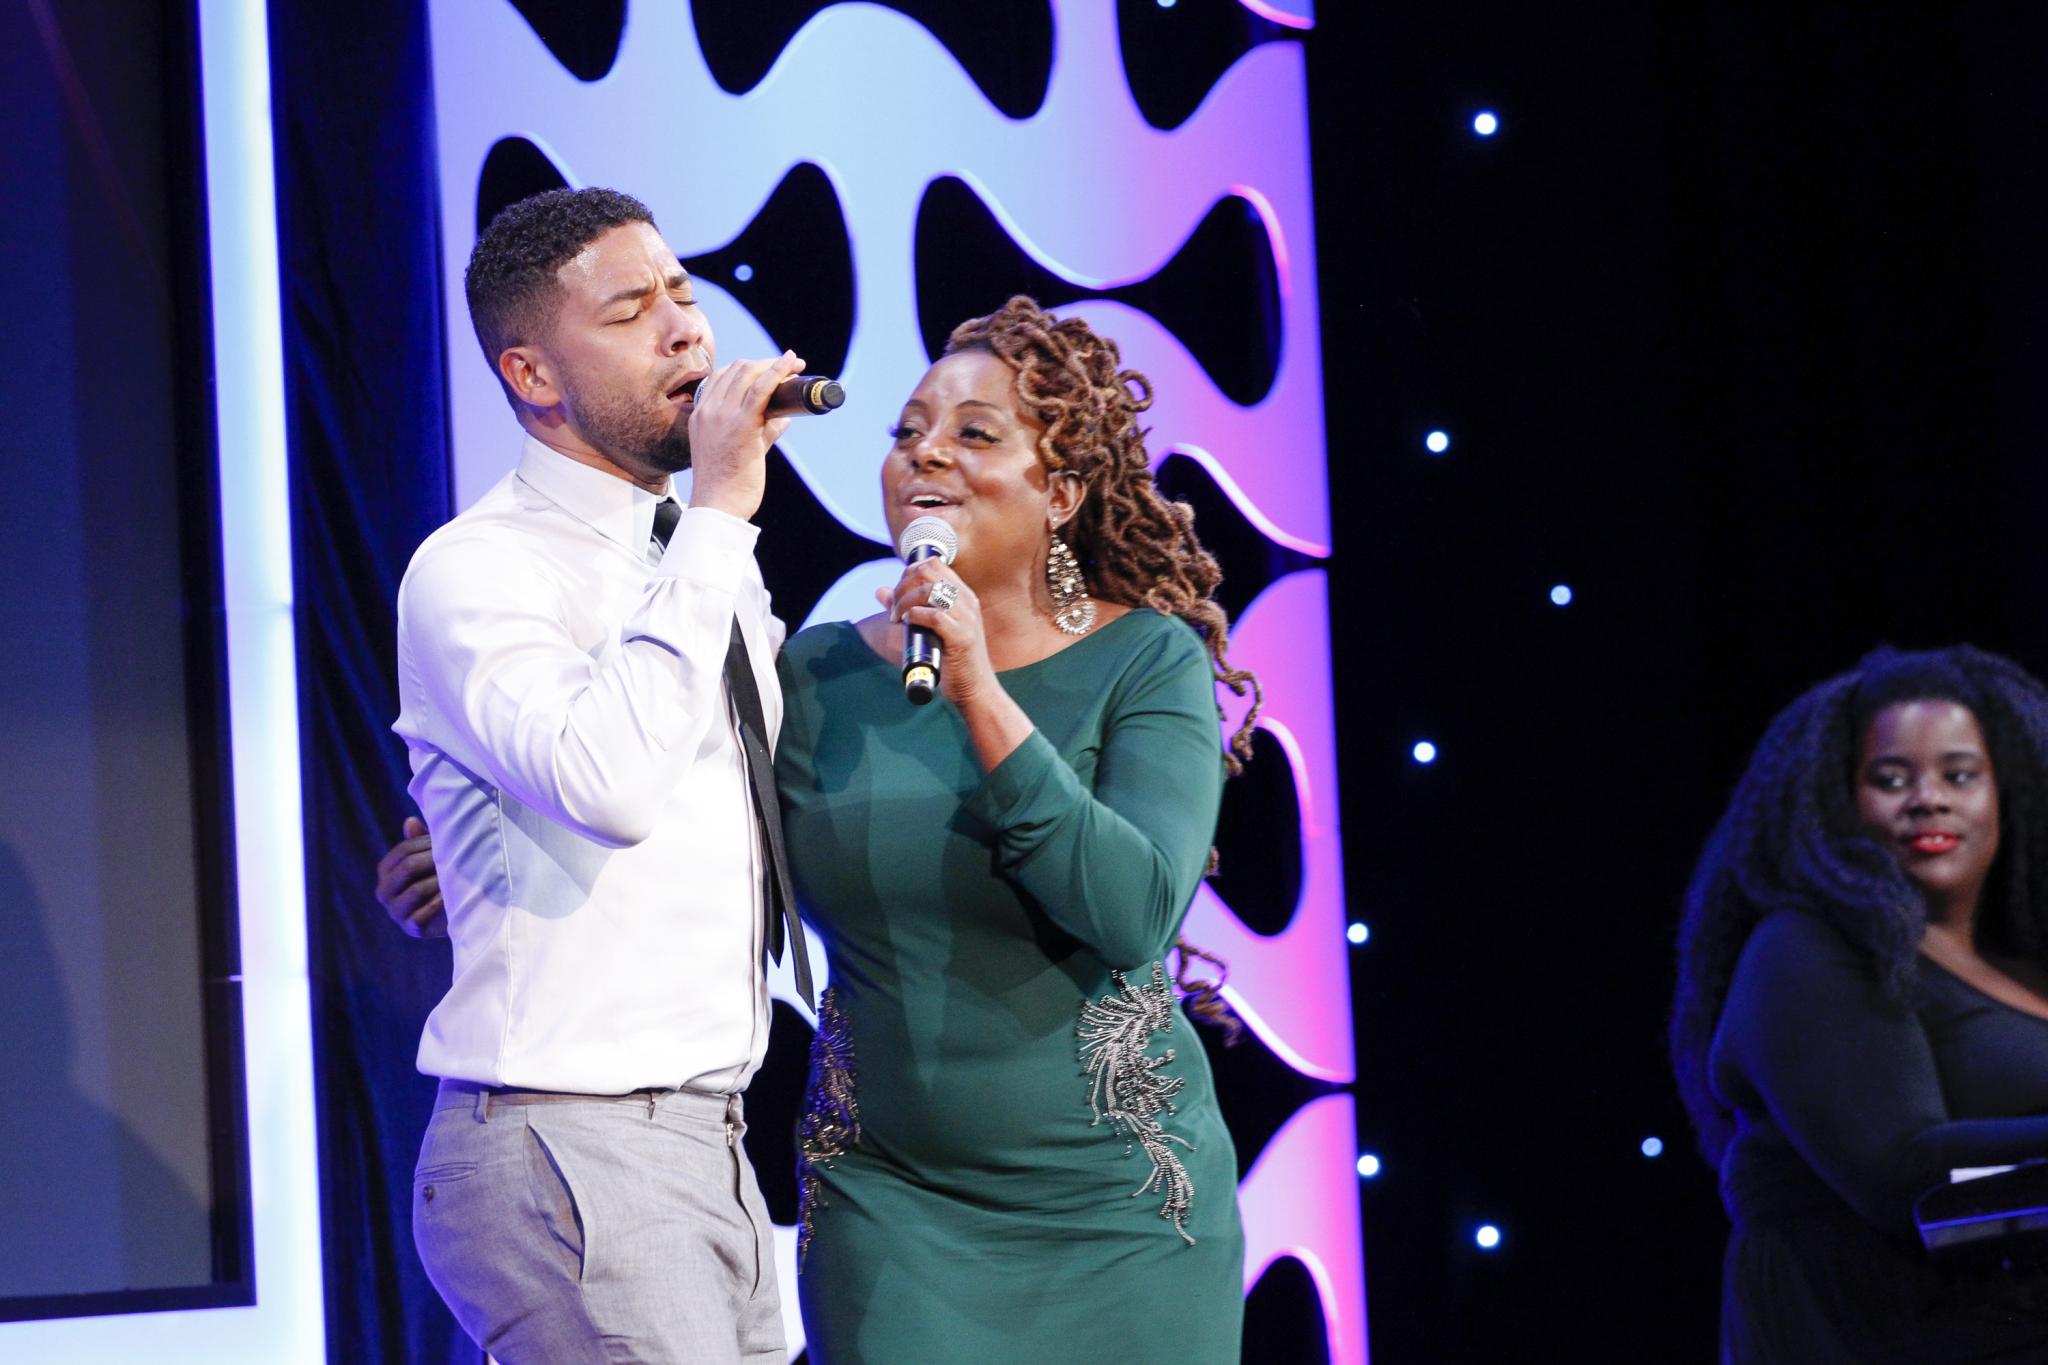 Jussie Smollett and Ledisi Singing Together Will Make You Smile